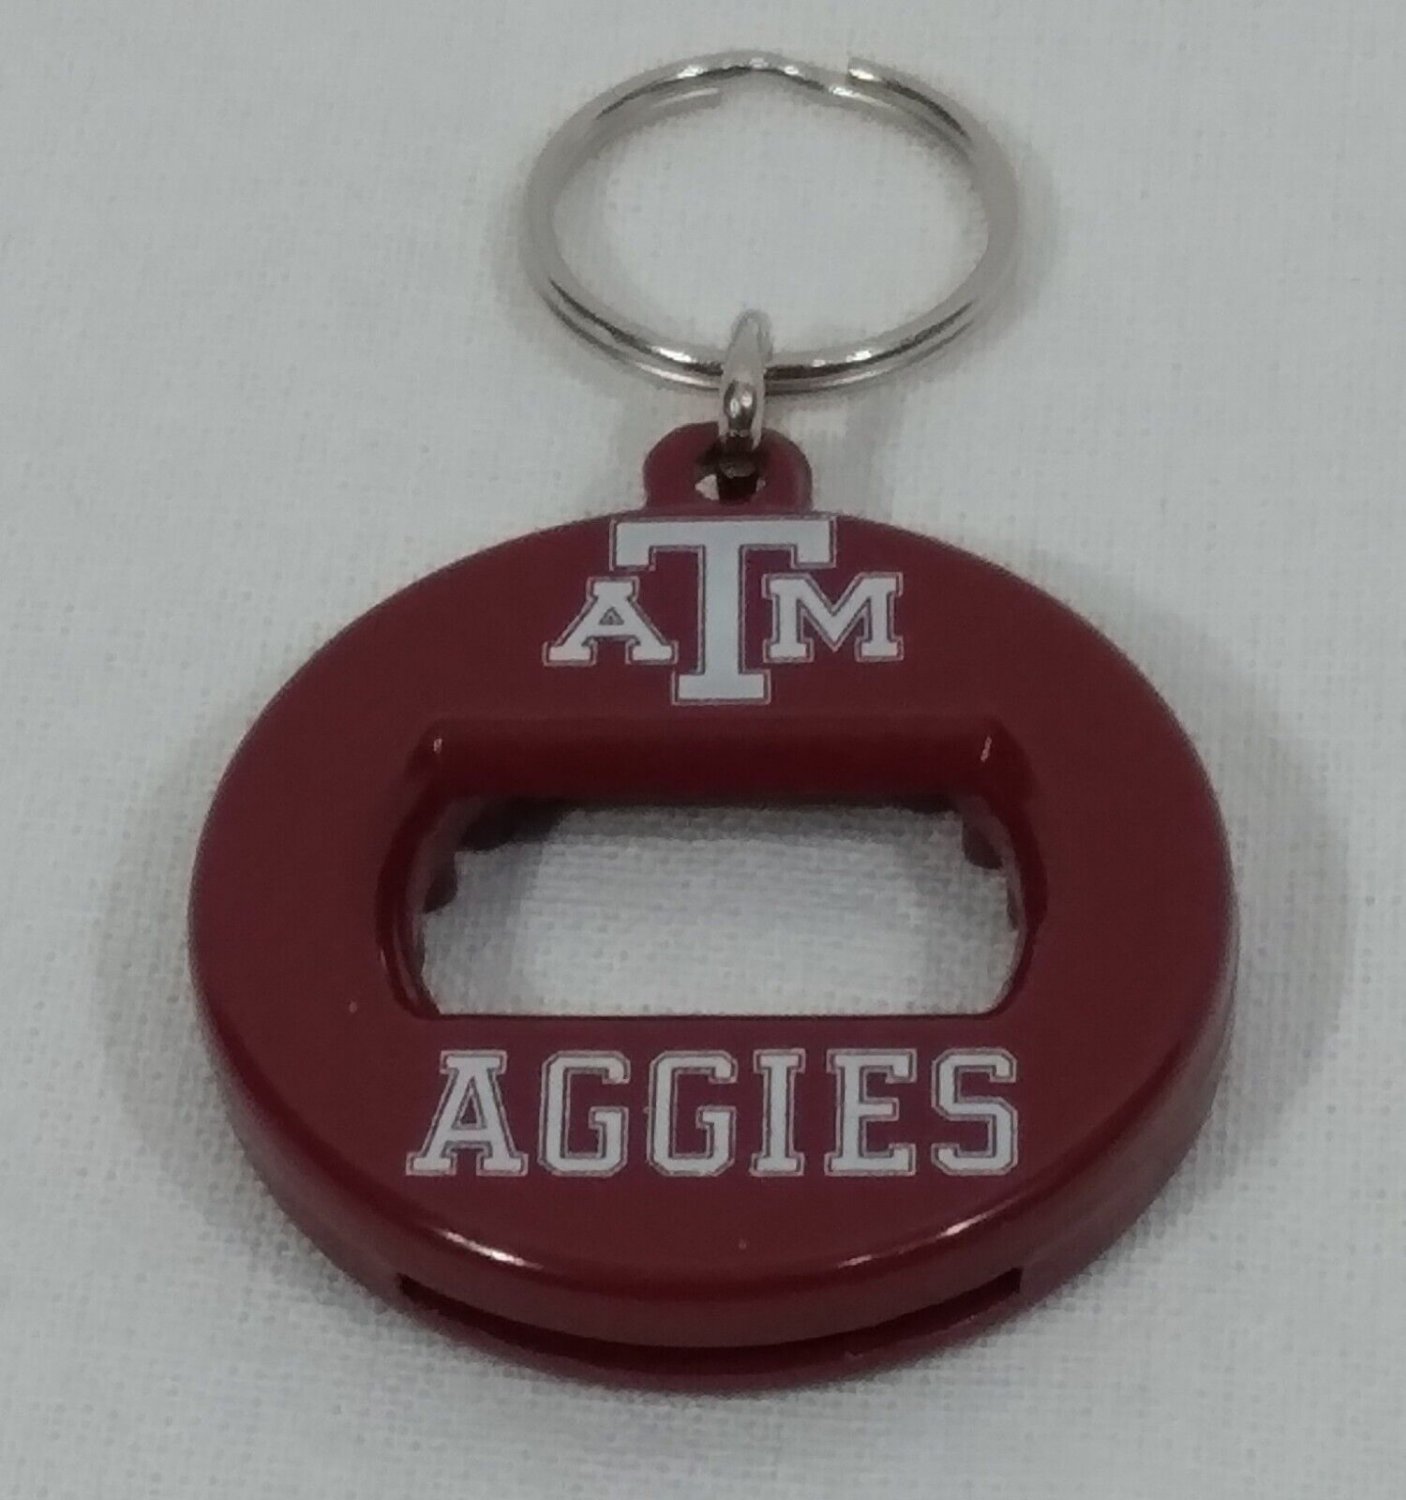 Vintage 1990s NCAA Texas A&M Aggies Bev Key 3 in 1 Bottle Can Opener Keychain